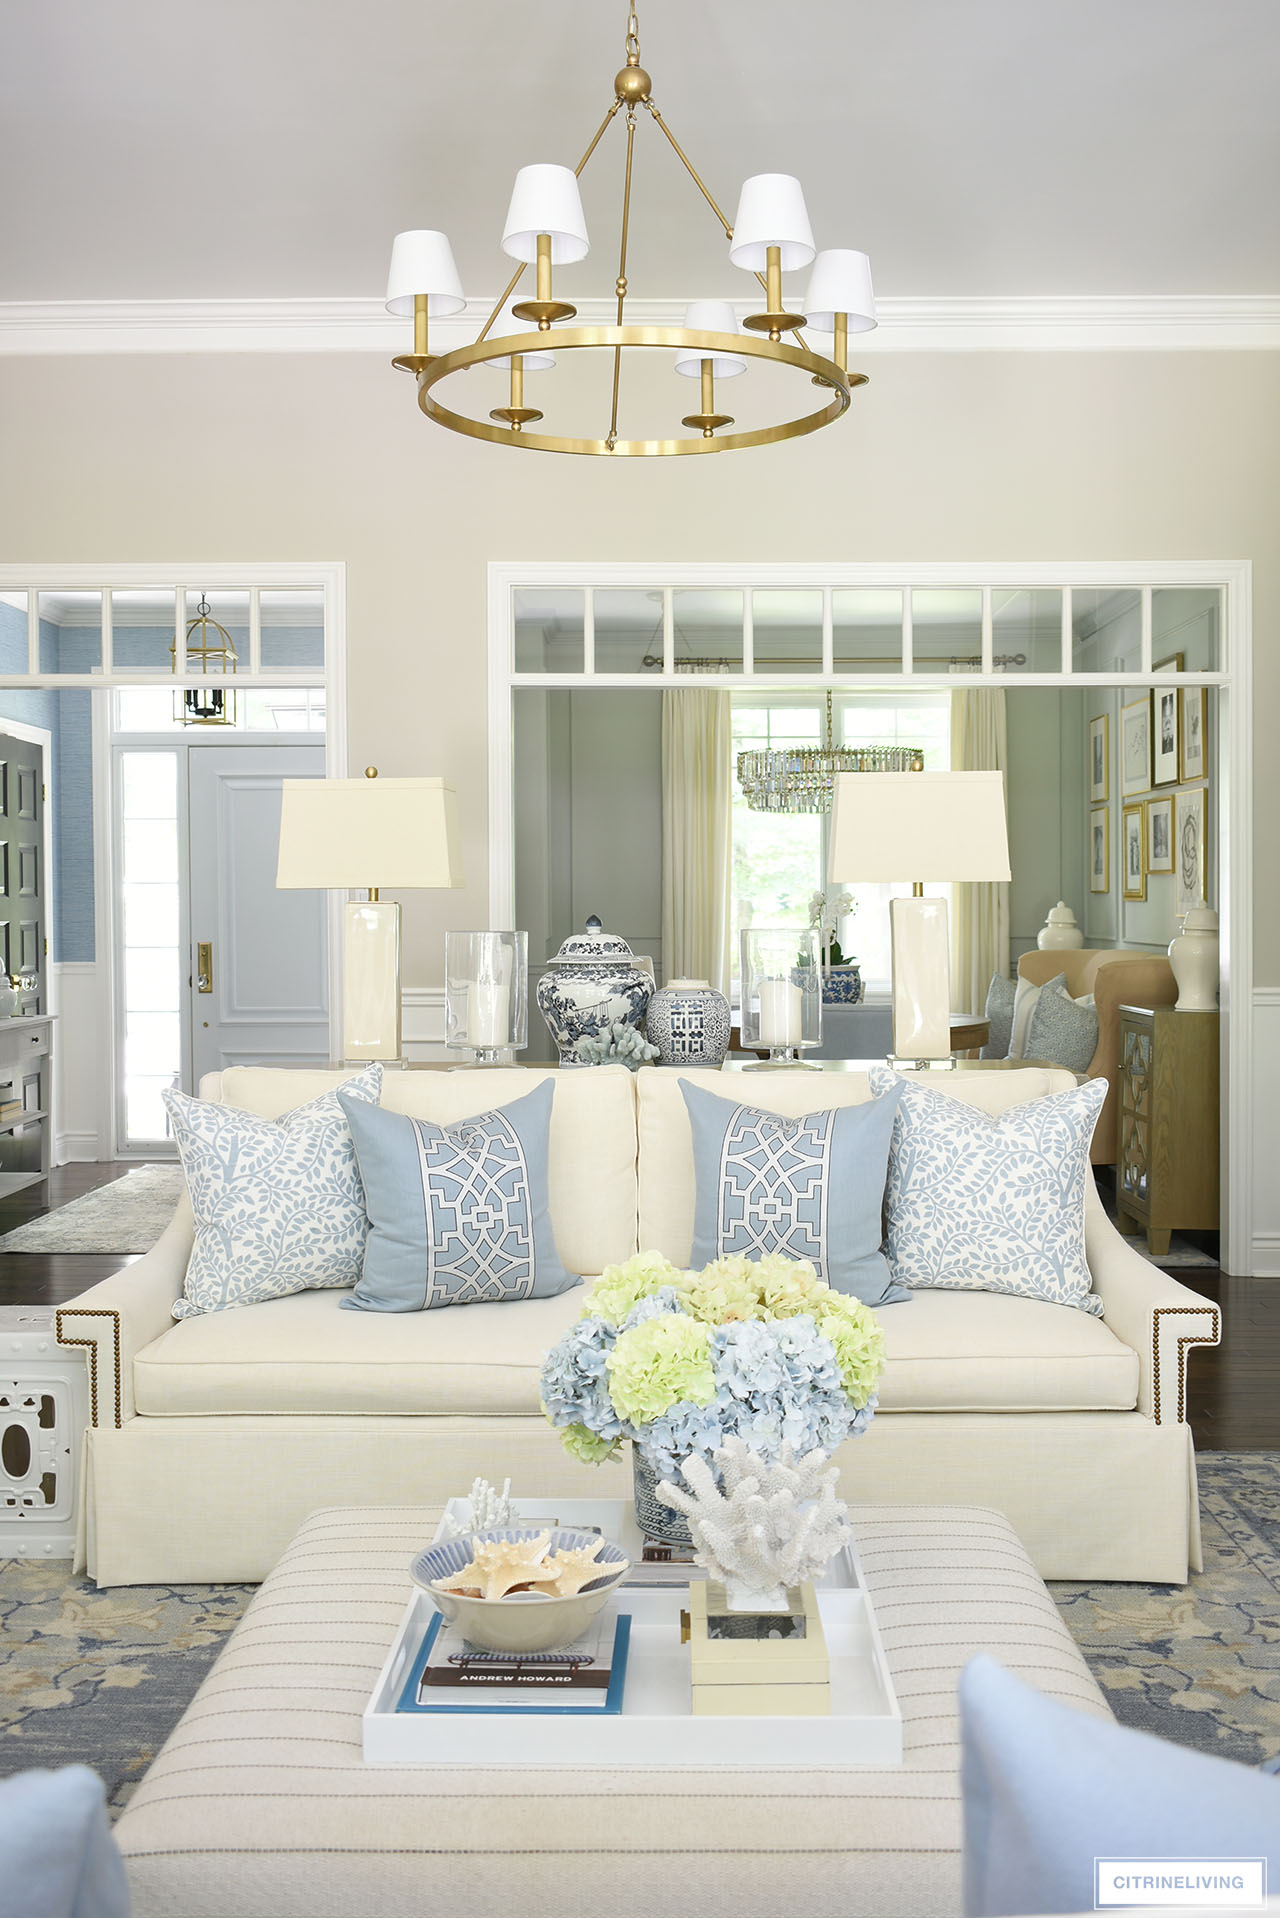 Living room styled for summer with an elegant light blue and white color palette, designer pillows, blue and green hydrangeas and coastal accents.